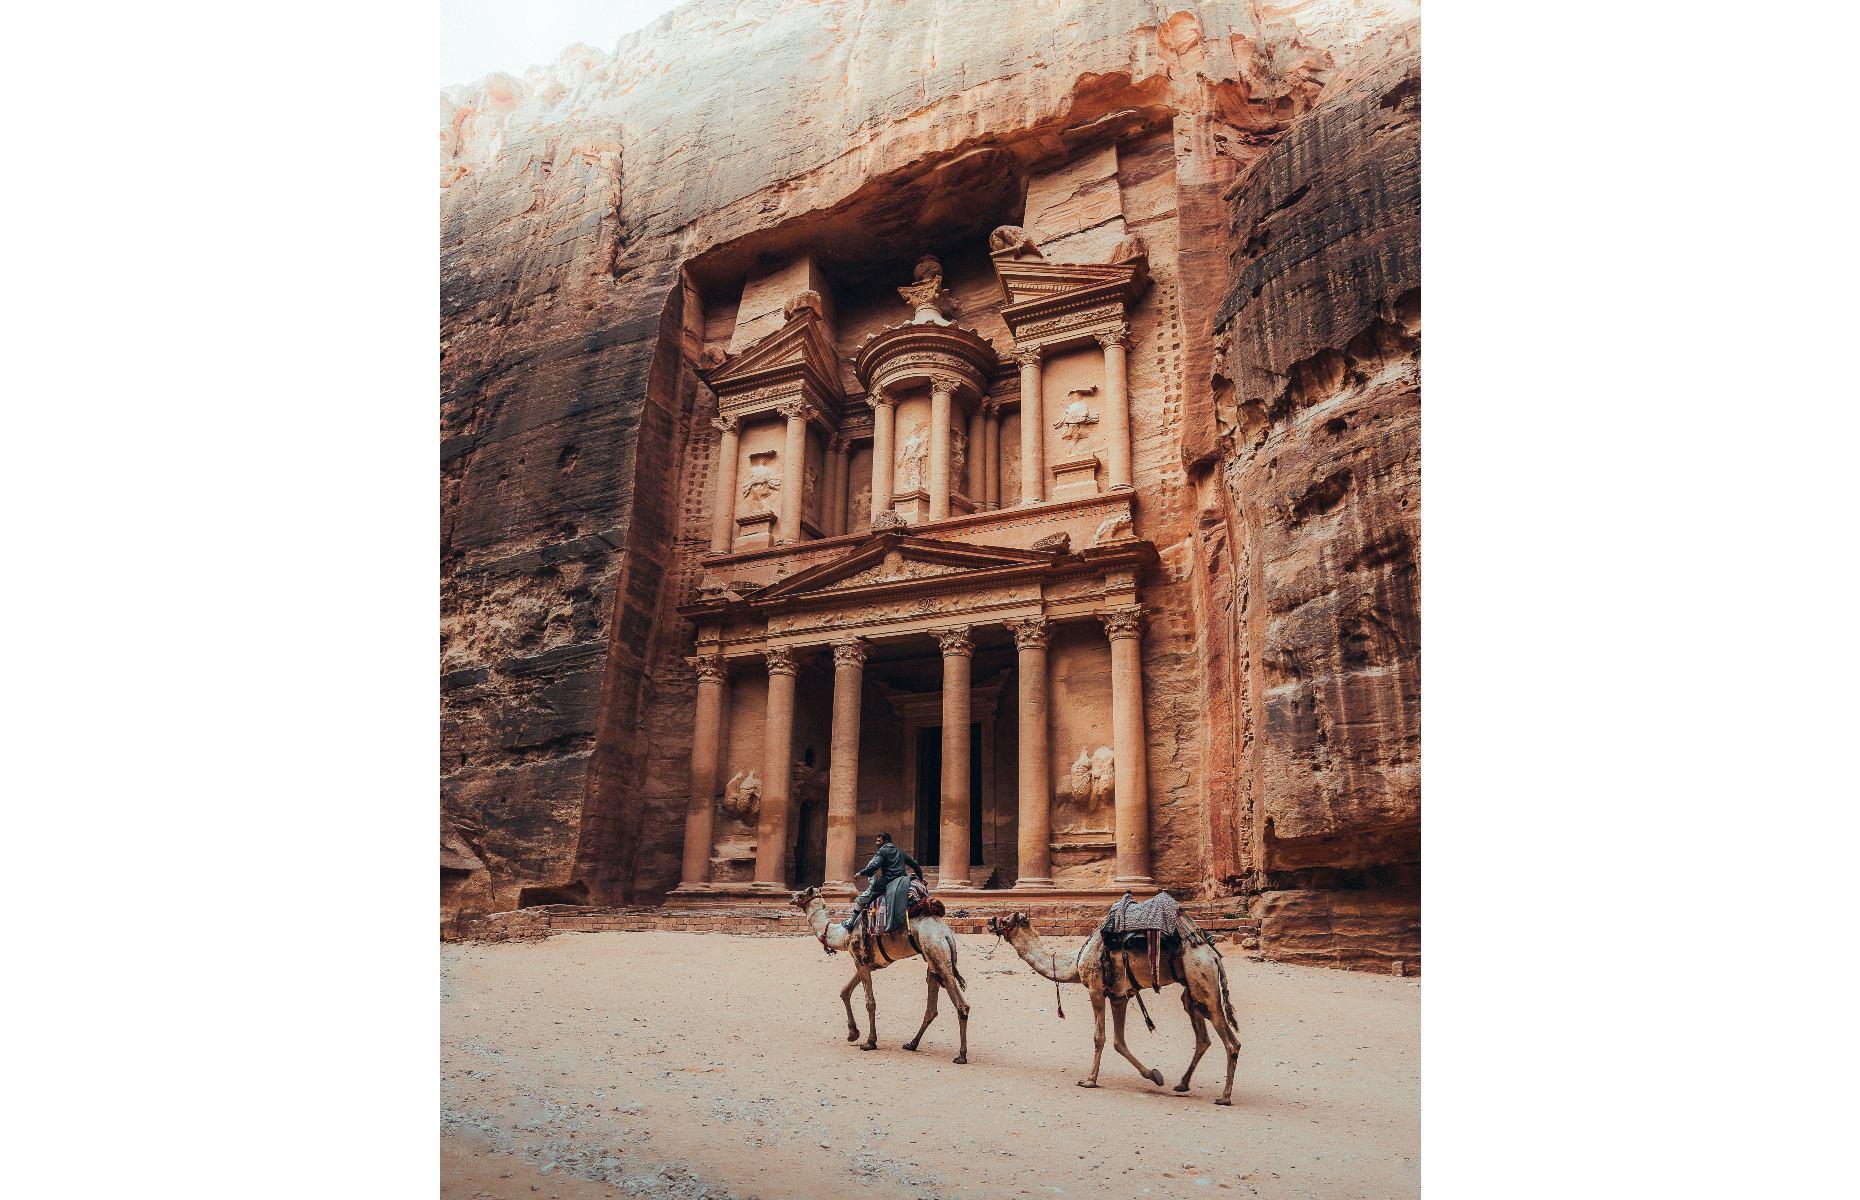 <p>One of the most elaborate temples in the ancient city of Petra, the Treasury (known as al-Khazneh in Arabic) was built some 2,000 years ago yet remains incredibly well-preserved today. You can still make out some of the intricate carvings on the facade, which include two large eagles, two lions and the Egyptian goddess of Isis, although several figures are yet to be identified. Luke Stackpoole was shortlisted in the World History category for this arresting image, in which two camels walk in the foreground. </p>